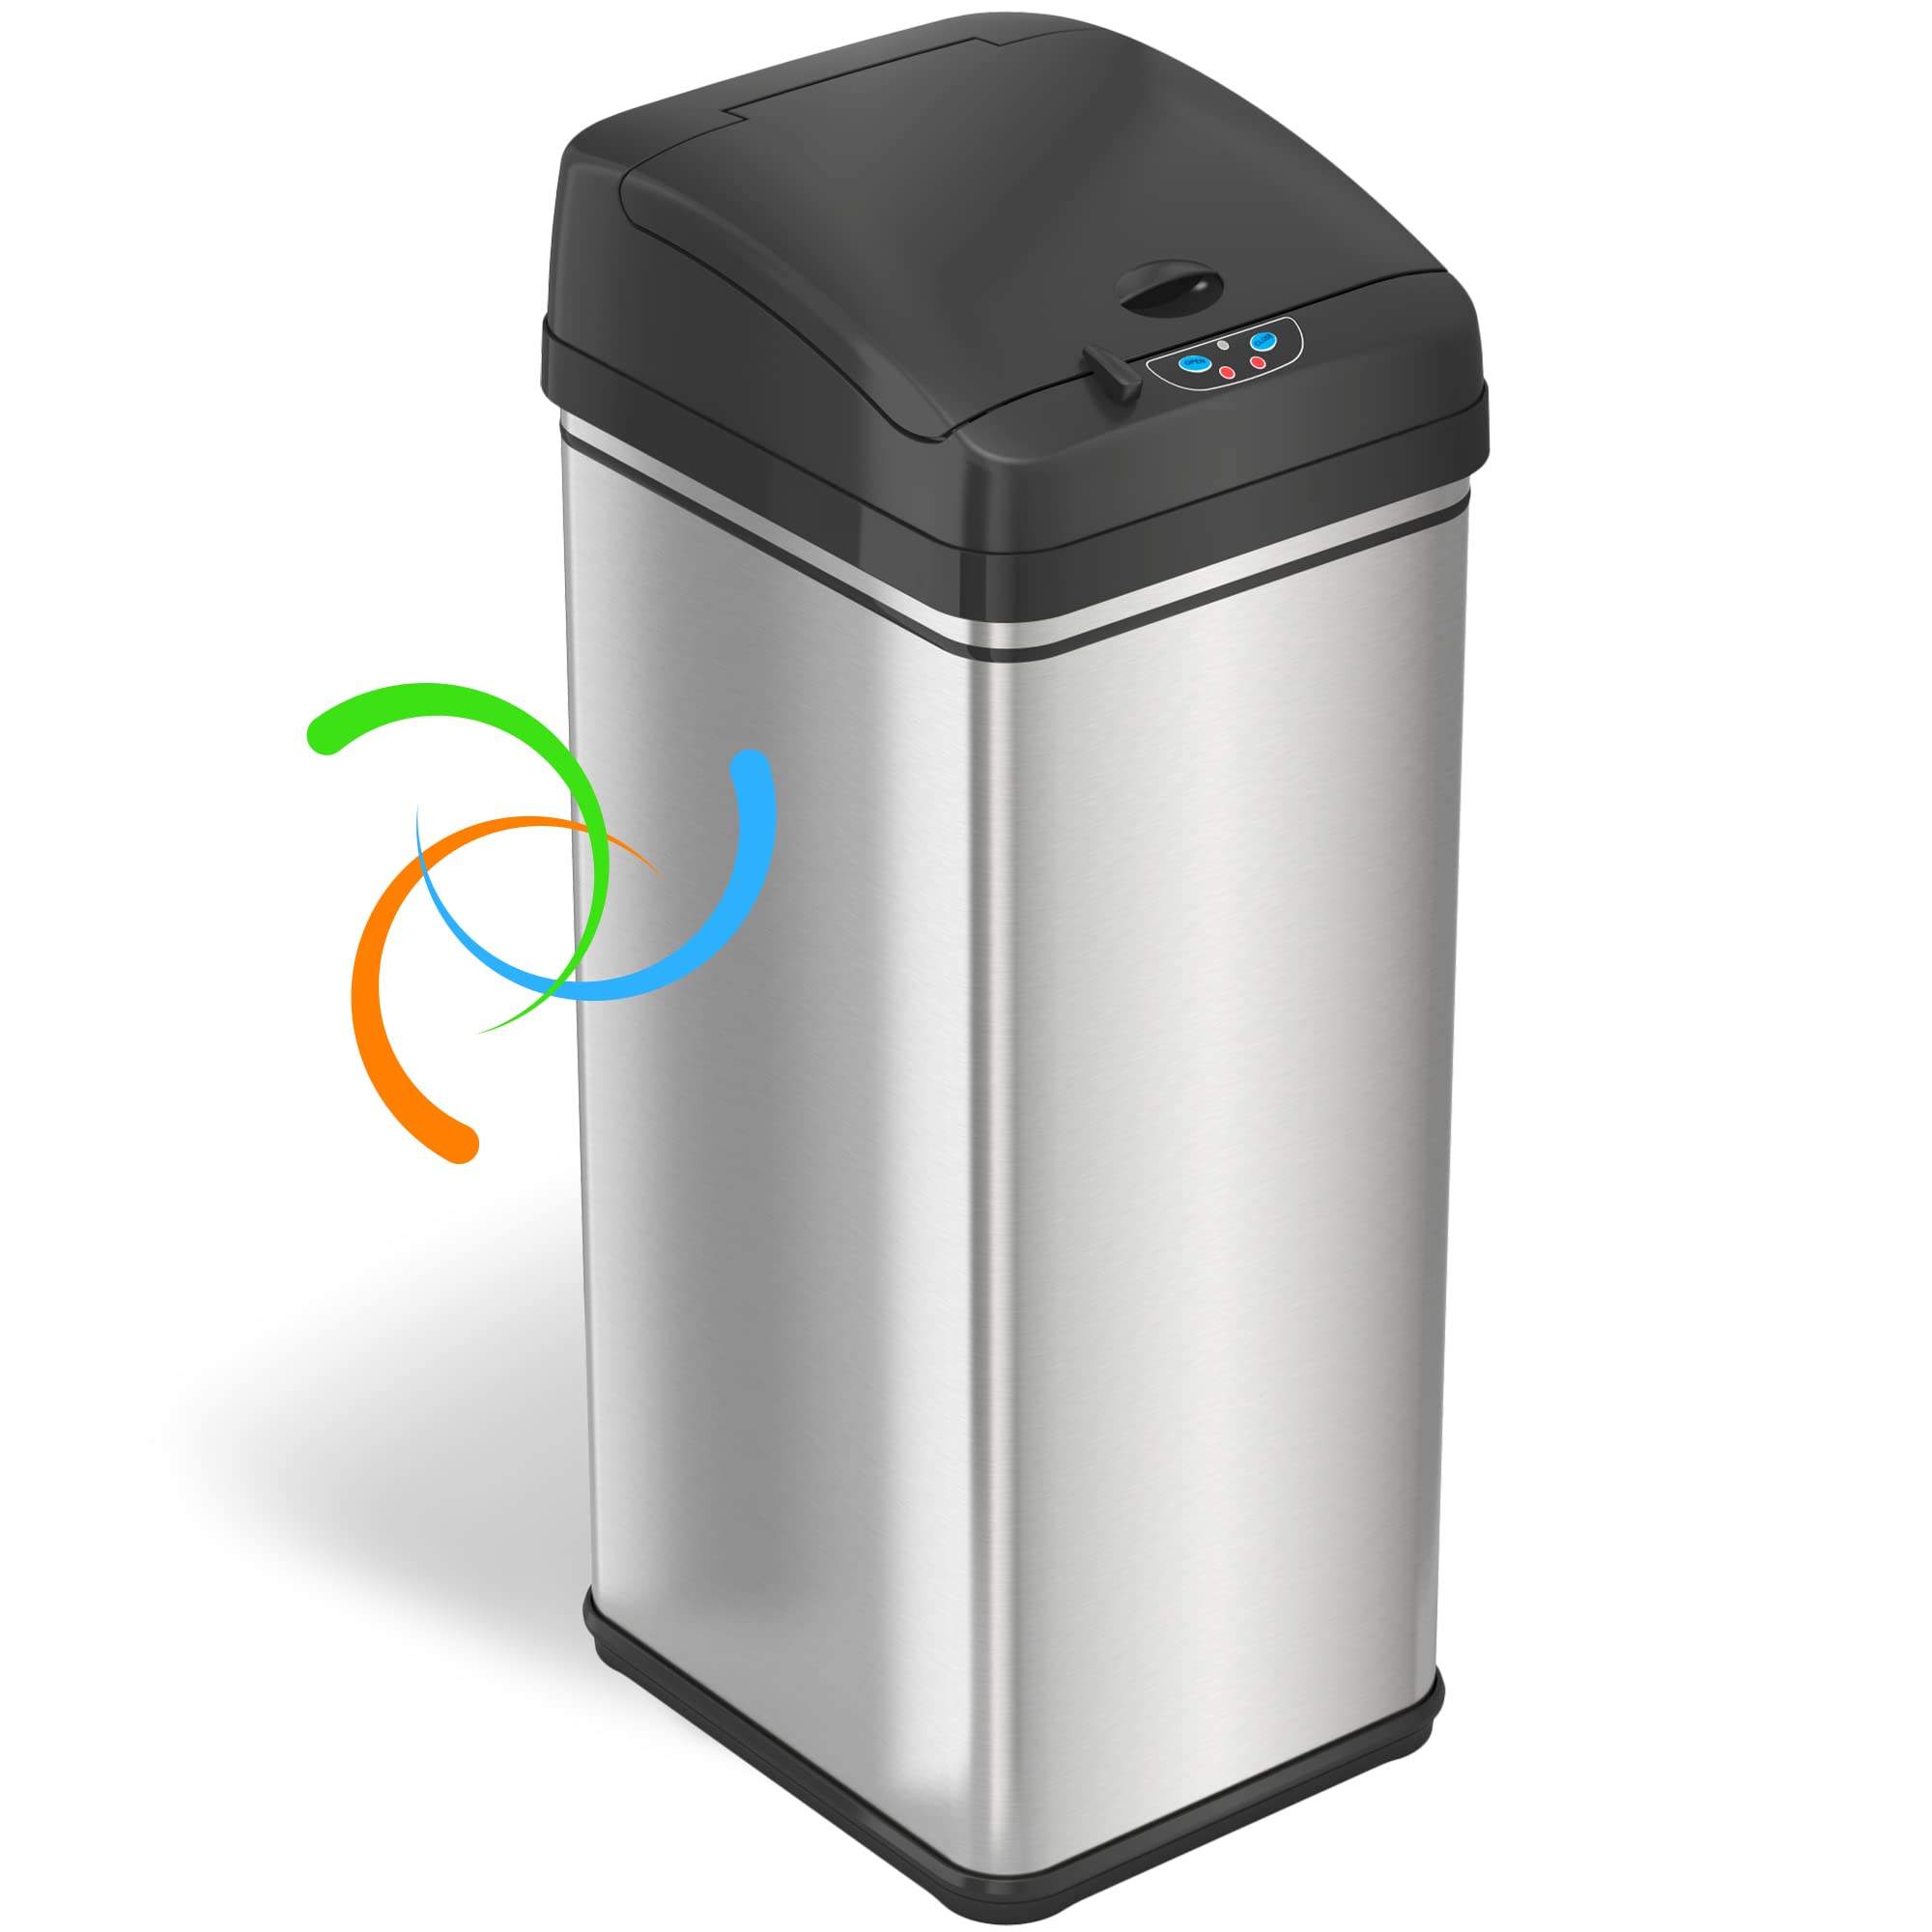 iTouchless New Model 13 Gallon Sensor Trash Can with Ad...